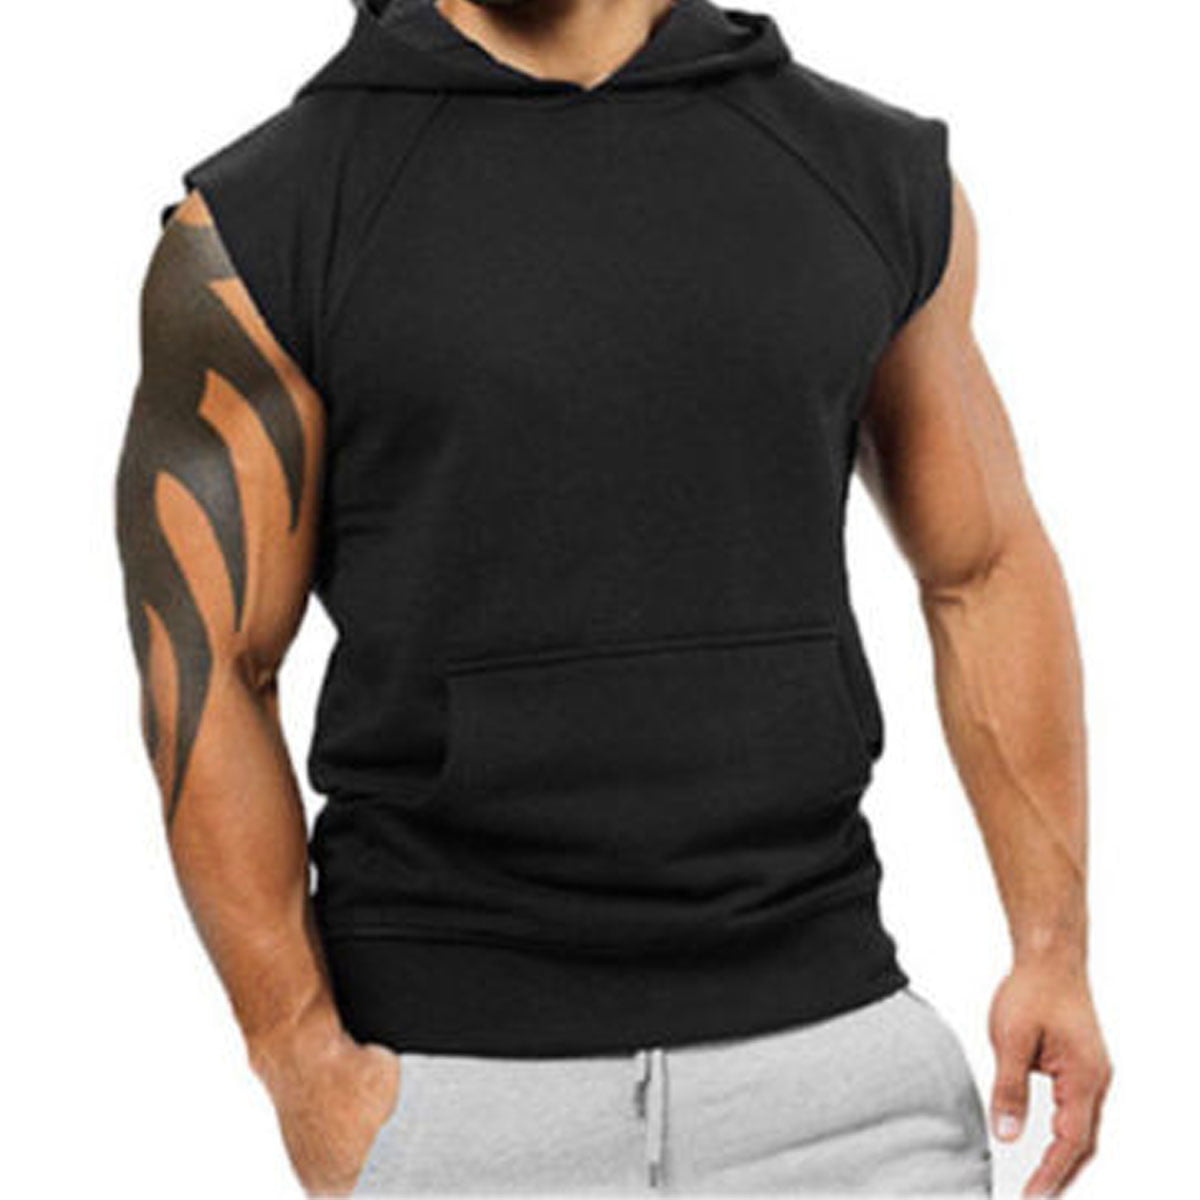 VOWUA Men Hoodies Tank Tops 3D Printed Sleeveless Camouflage Bodybuilding Tight-Drying Vest Sports T-Shirt 